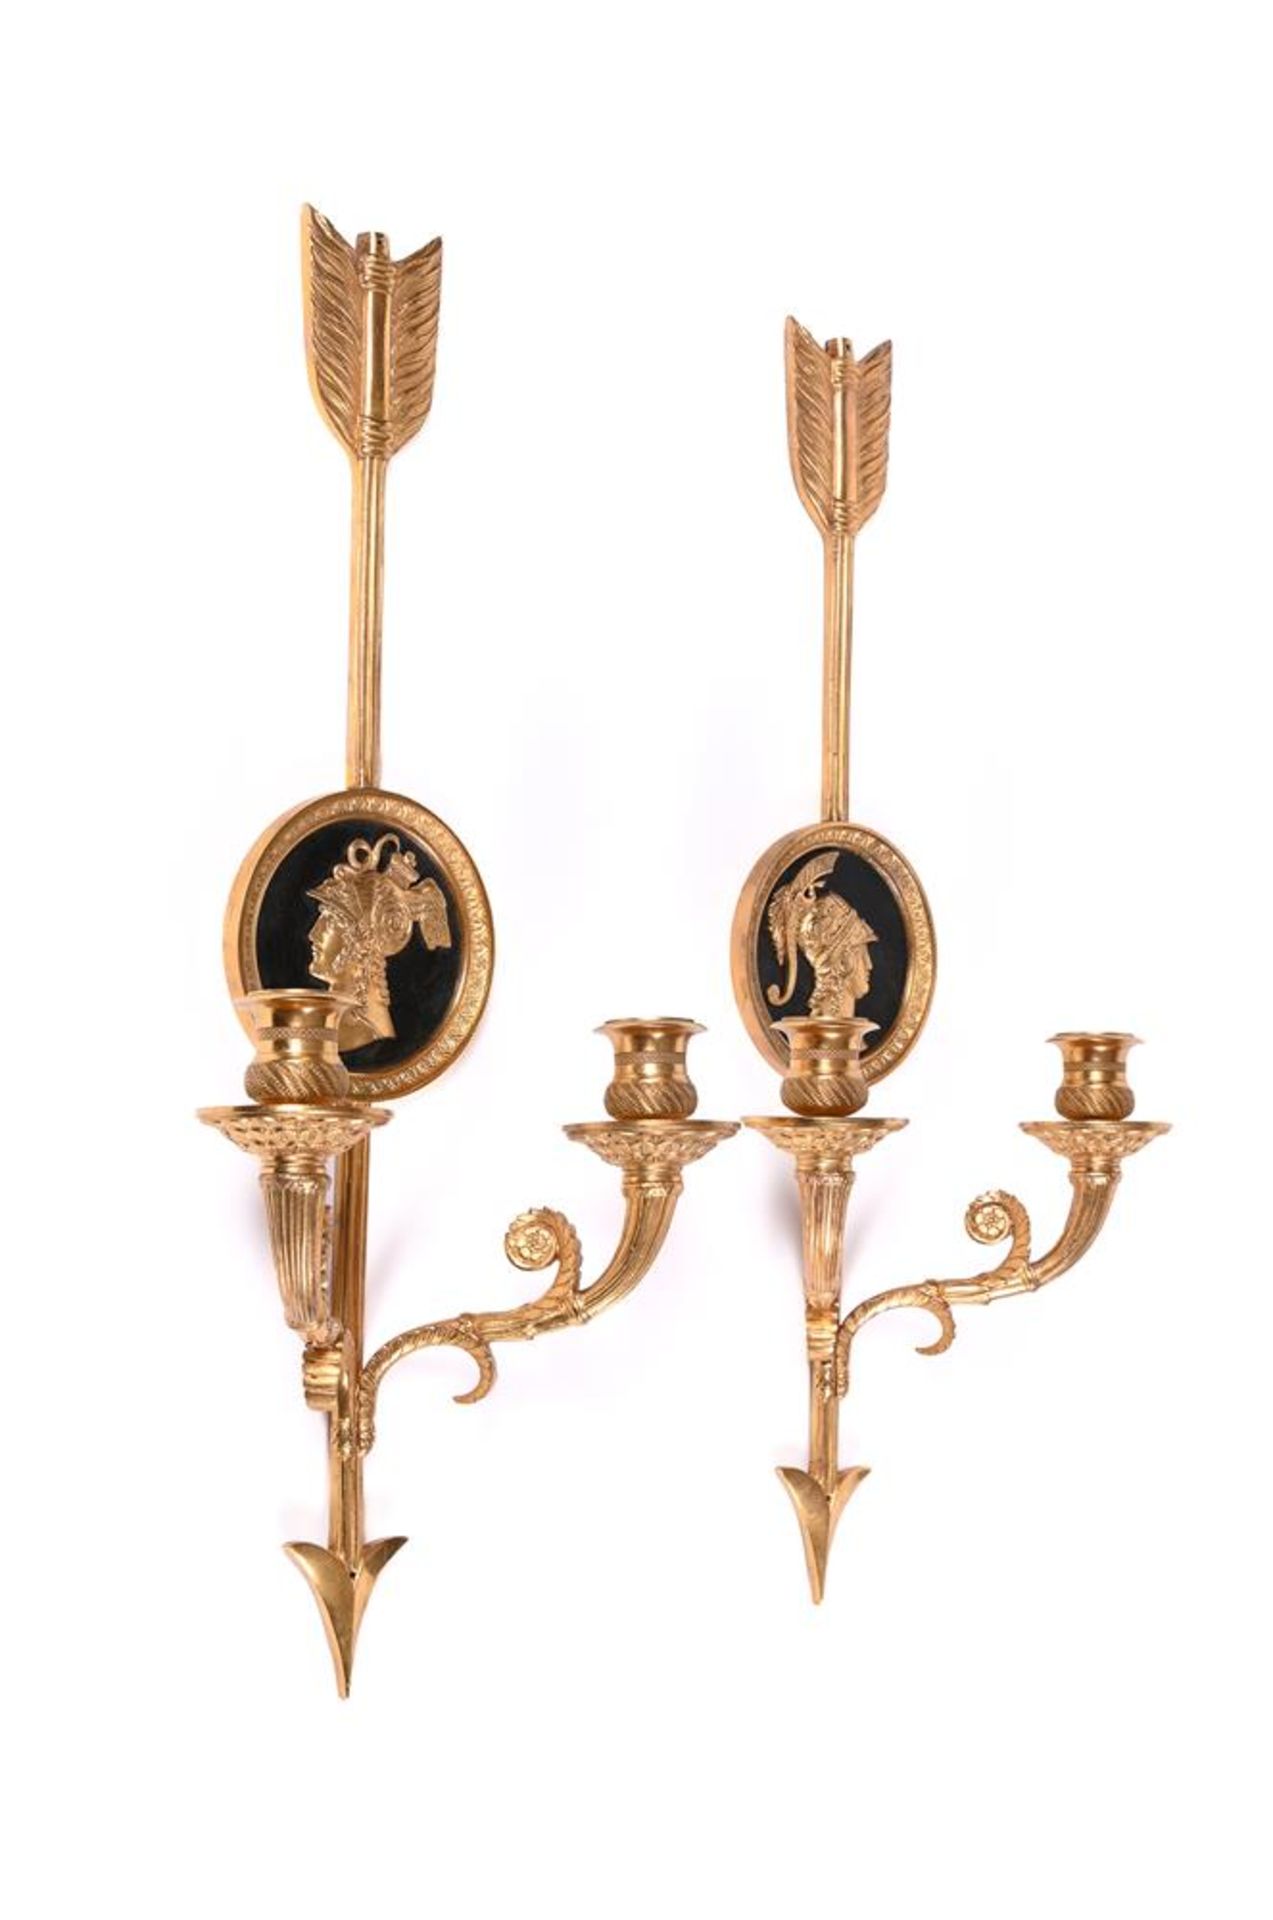 A PAIR OF GILT-BRONZE AND ORMOLU TWO BRANCH WALL LIGHTS, IN THE EMPIRE STYLE, 19TH CENTURY